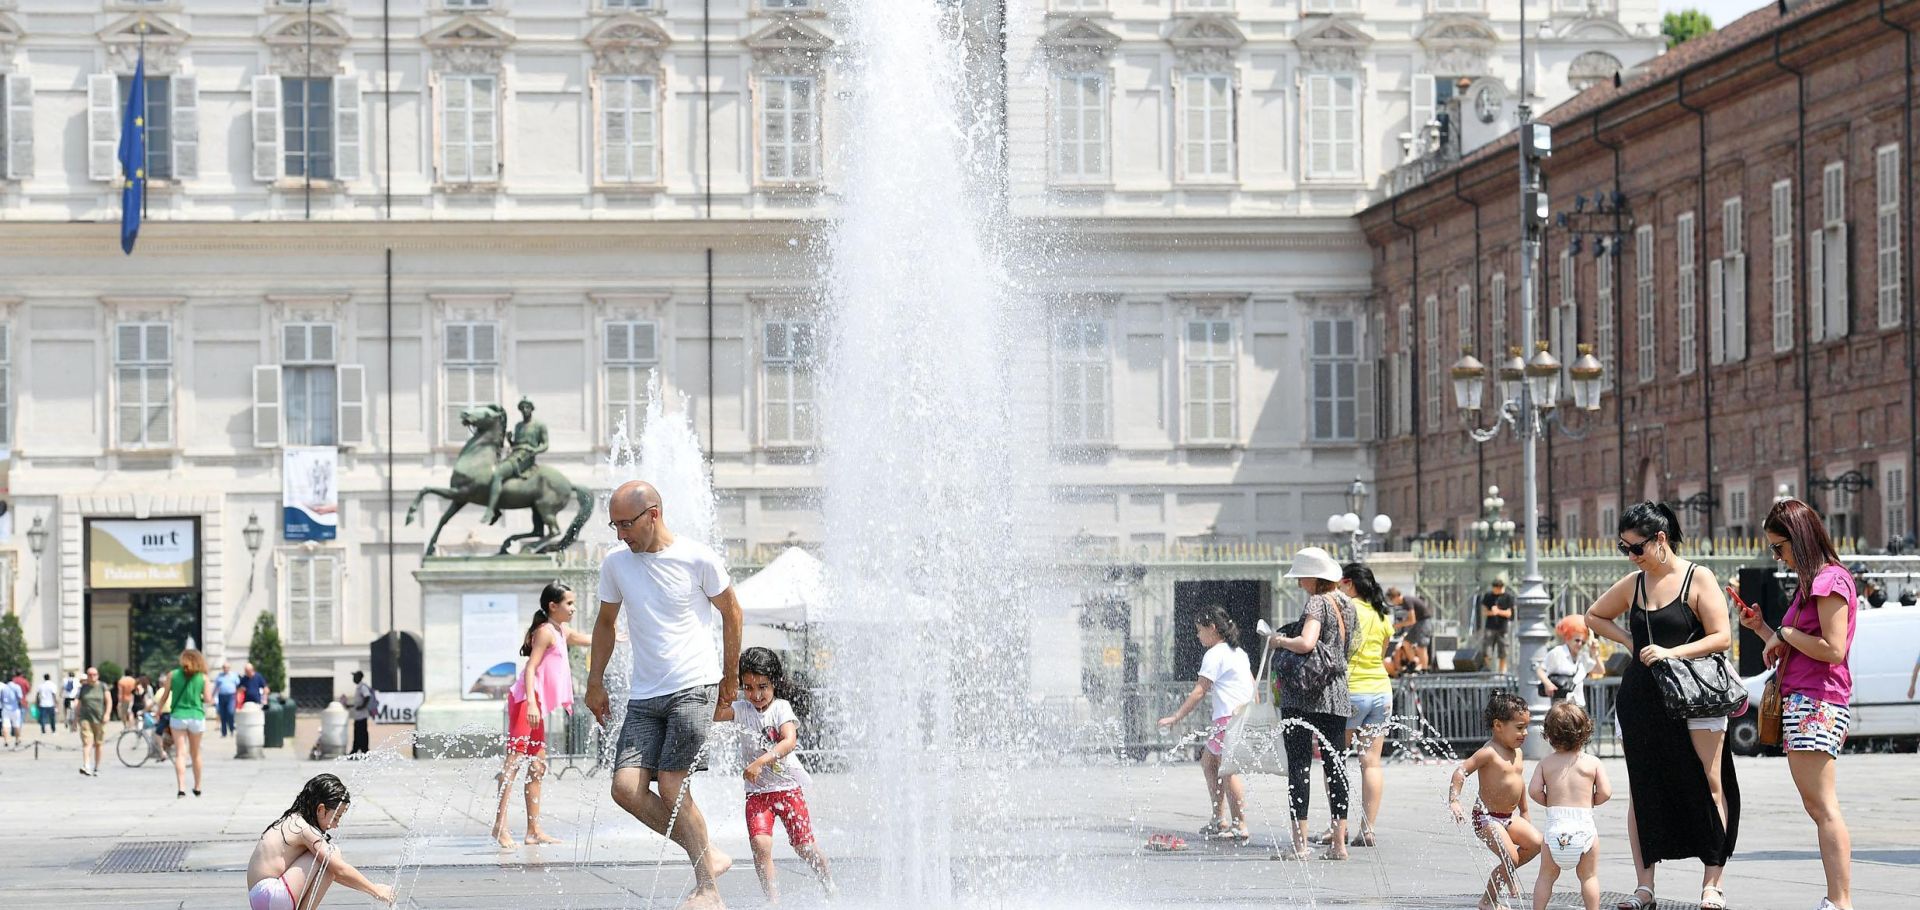 epa06047345 People refresh themselves at the Castello square fountains in Turin, northwest Italy, 24 June 2017. A heat wave has been affecting Italy for several days with temperatures of over 30 degrees Celsius.  EPA/ALESSANDRO DI MARCO